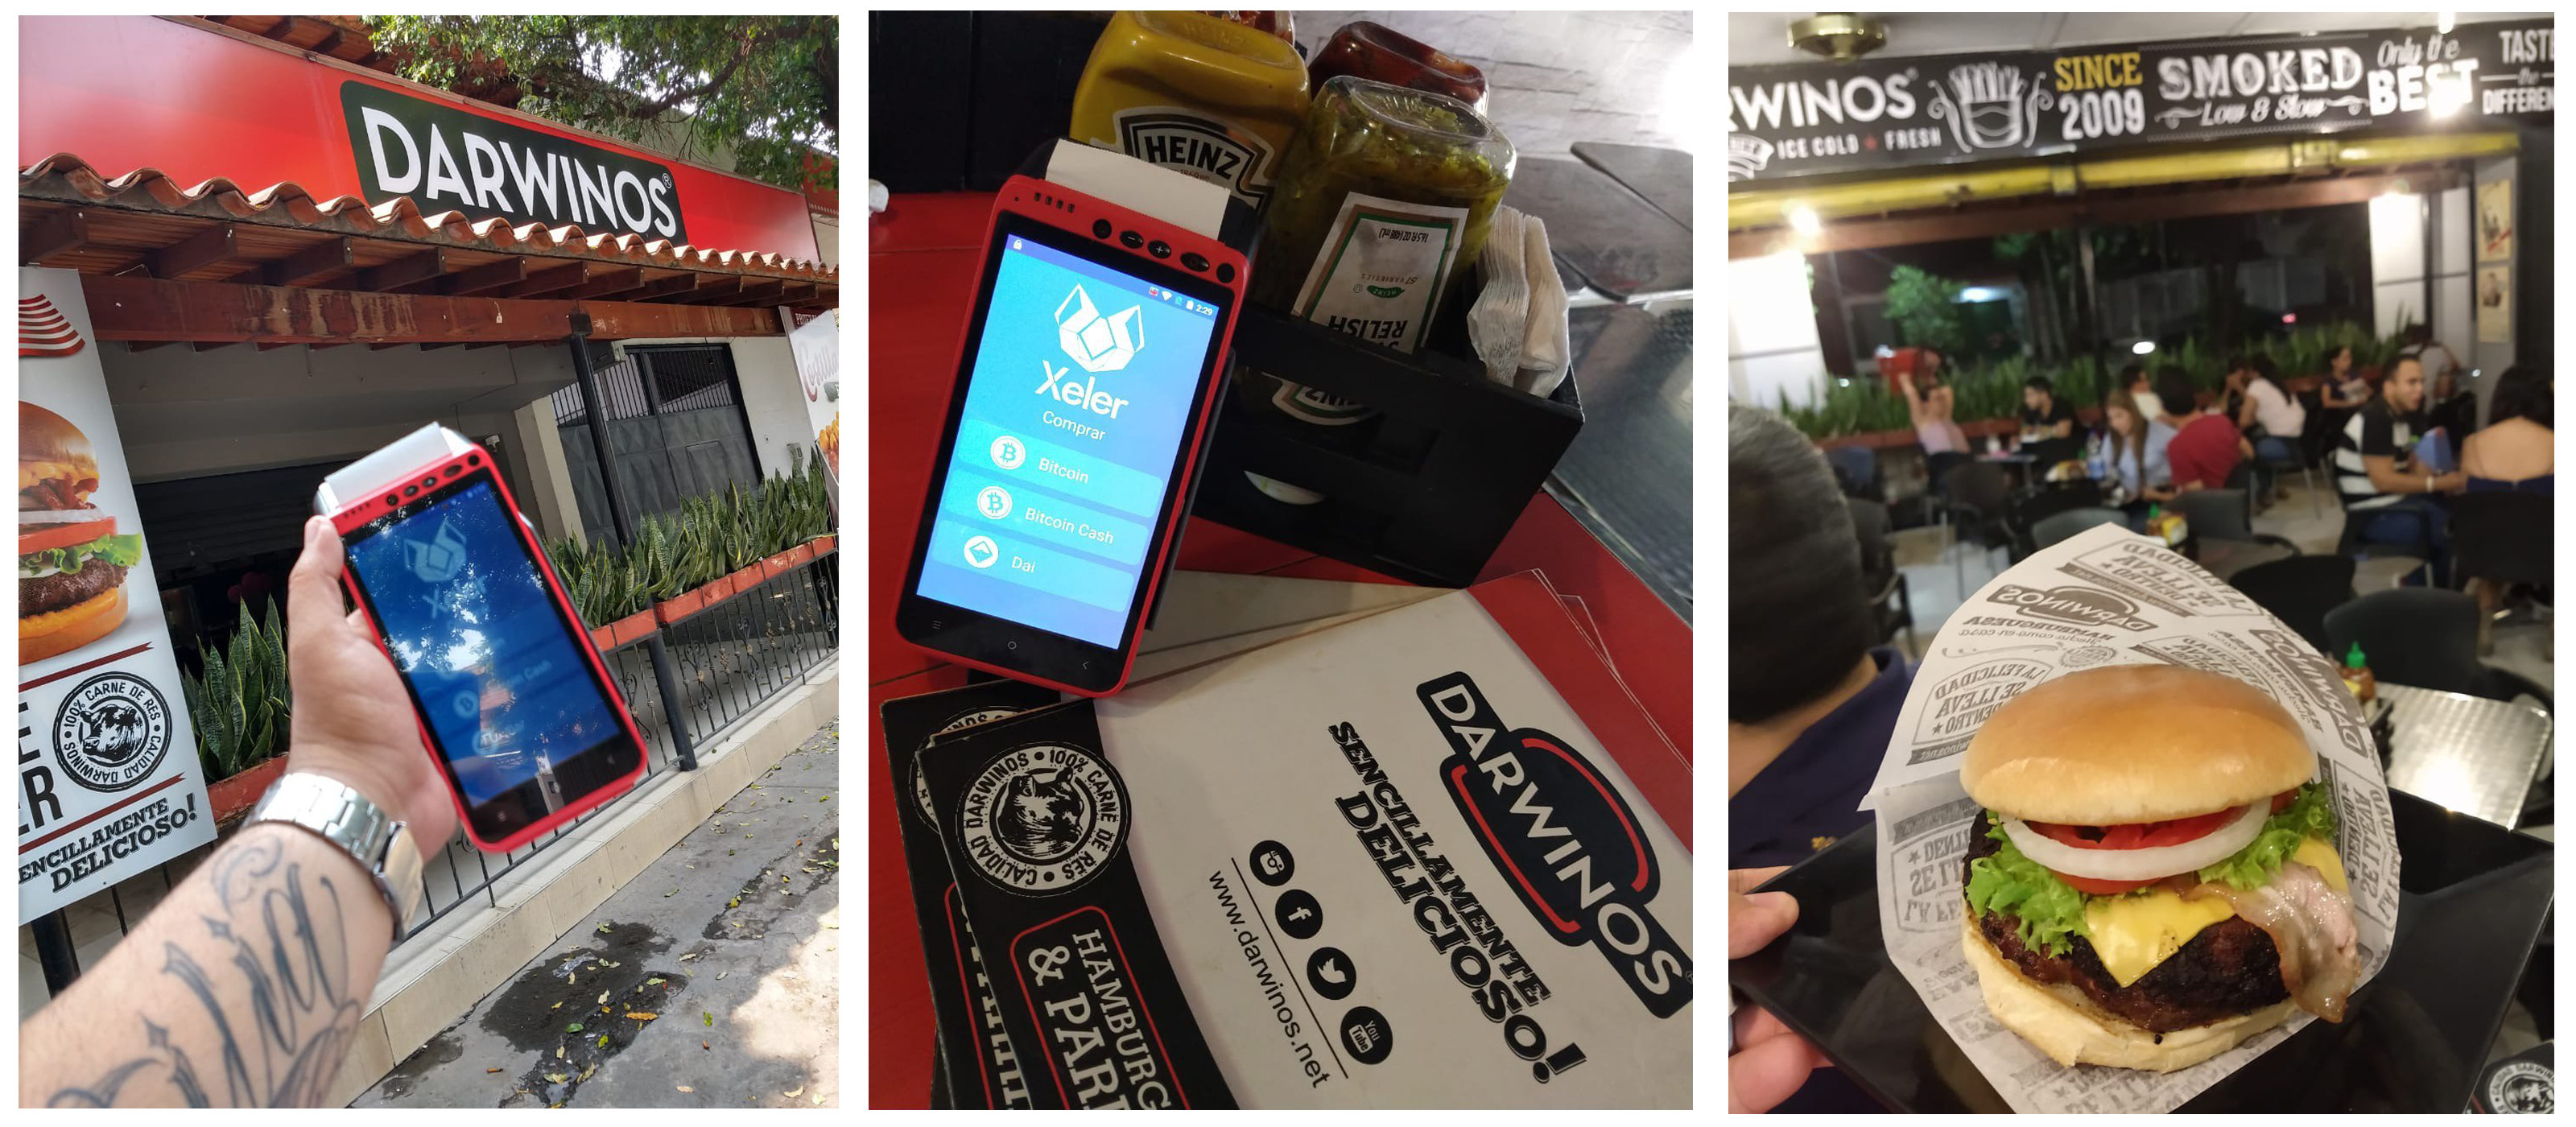 Darwinos Burger Joint Hosts Colombia's Second Point of Sale and Crypto ATM